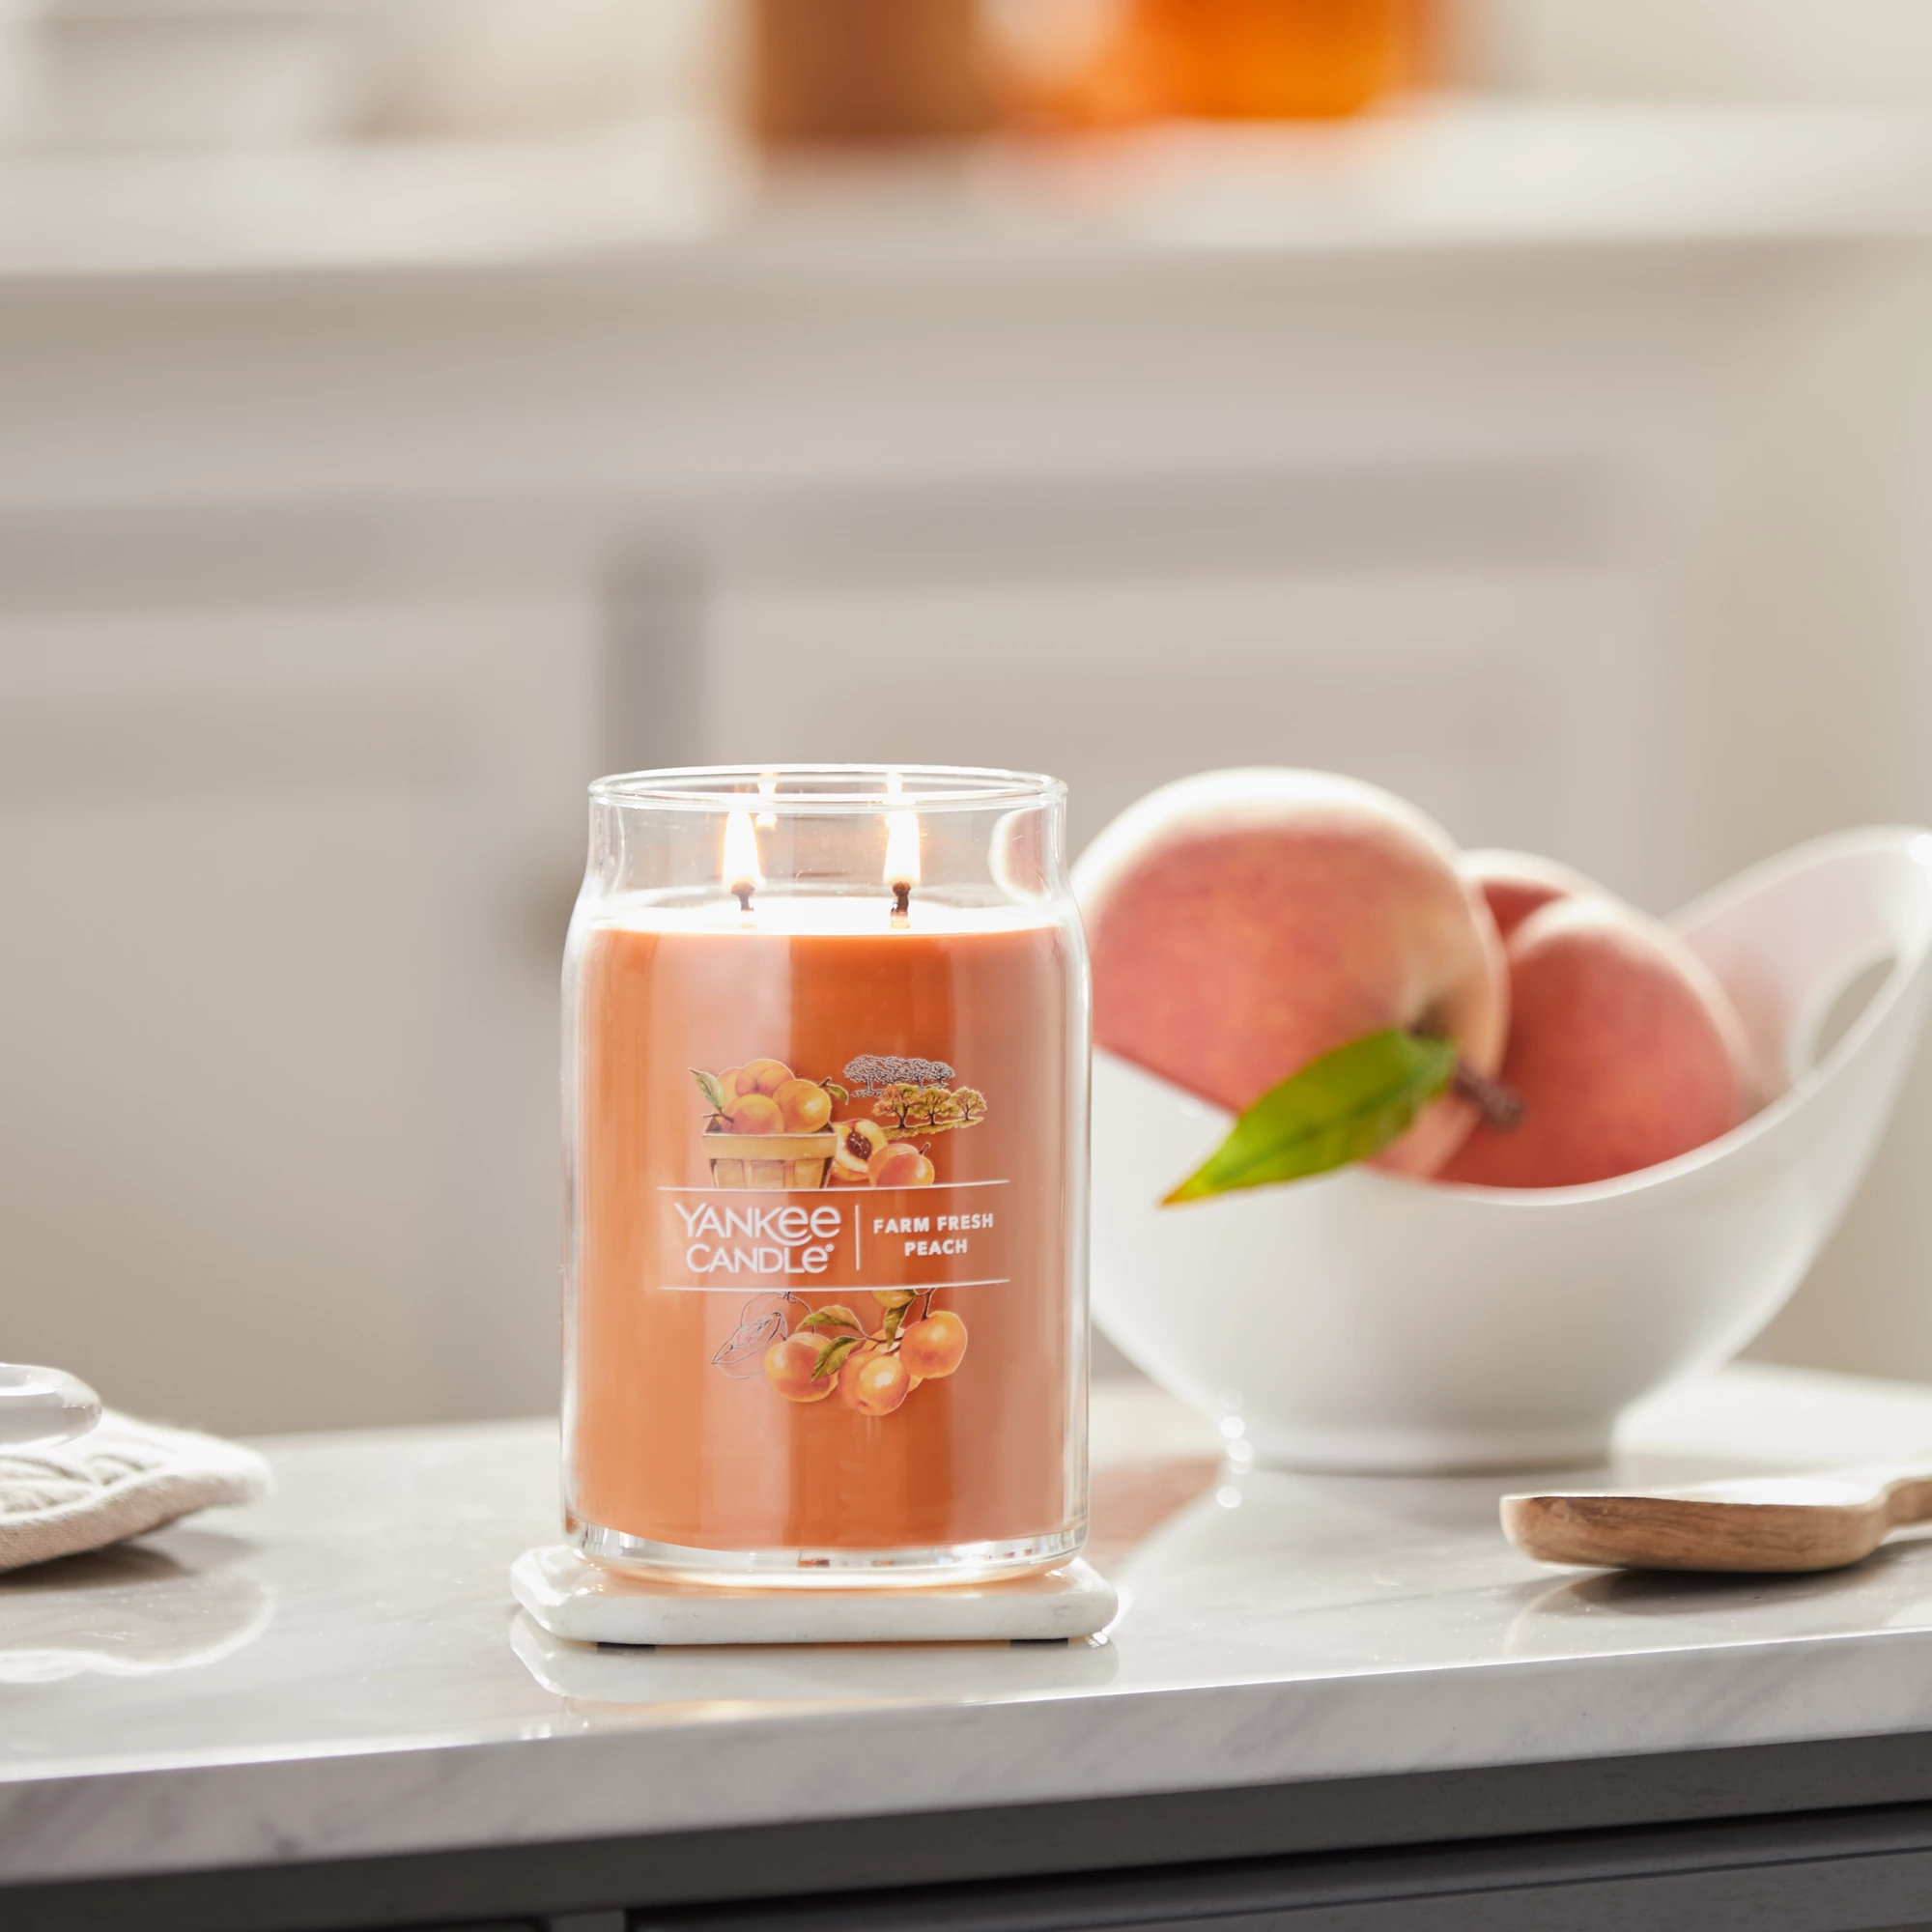 YANKEE CANDLE Signature Farm Fresh Peach Scented Jar Candle & Reviews